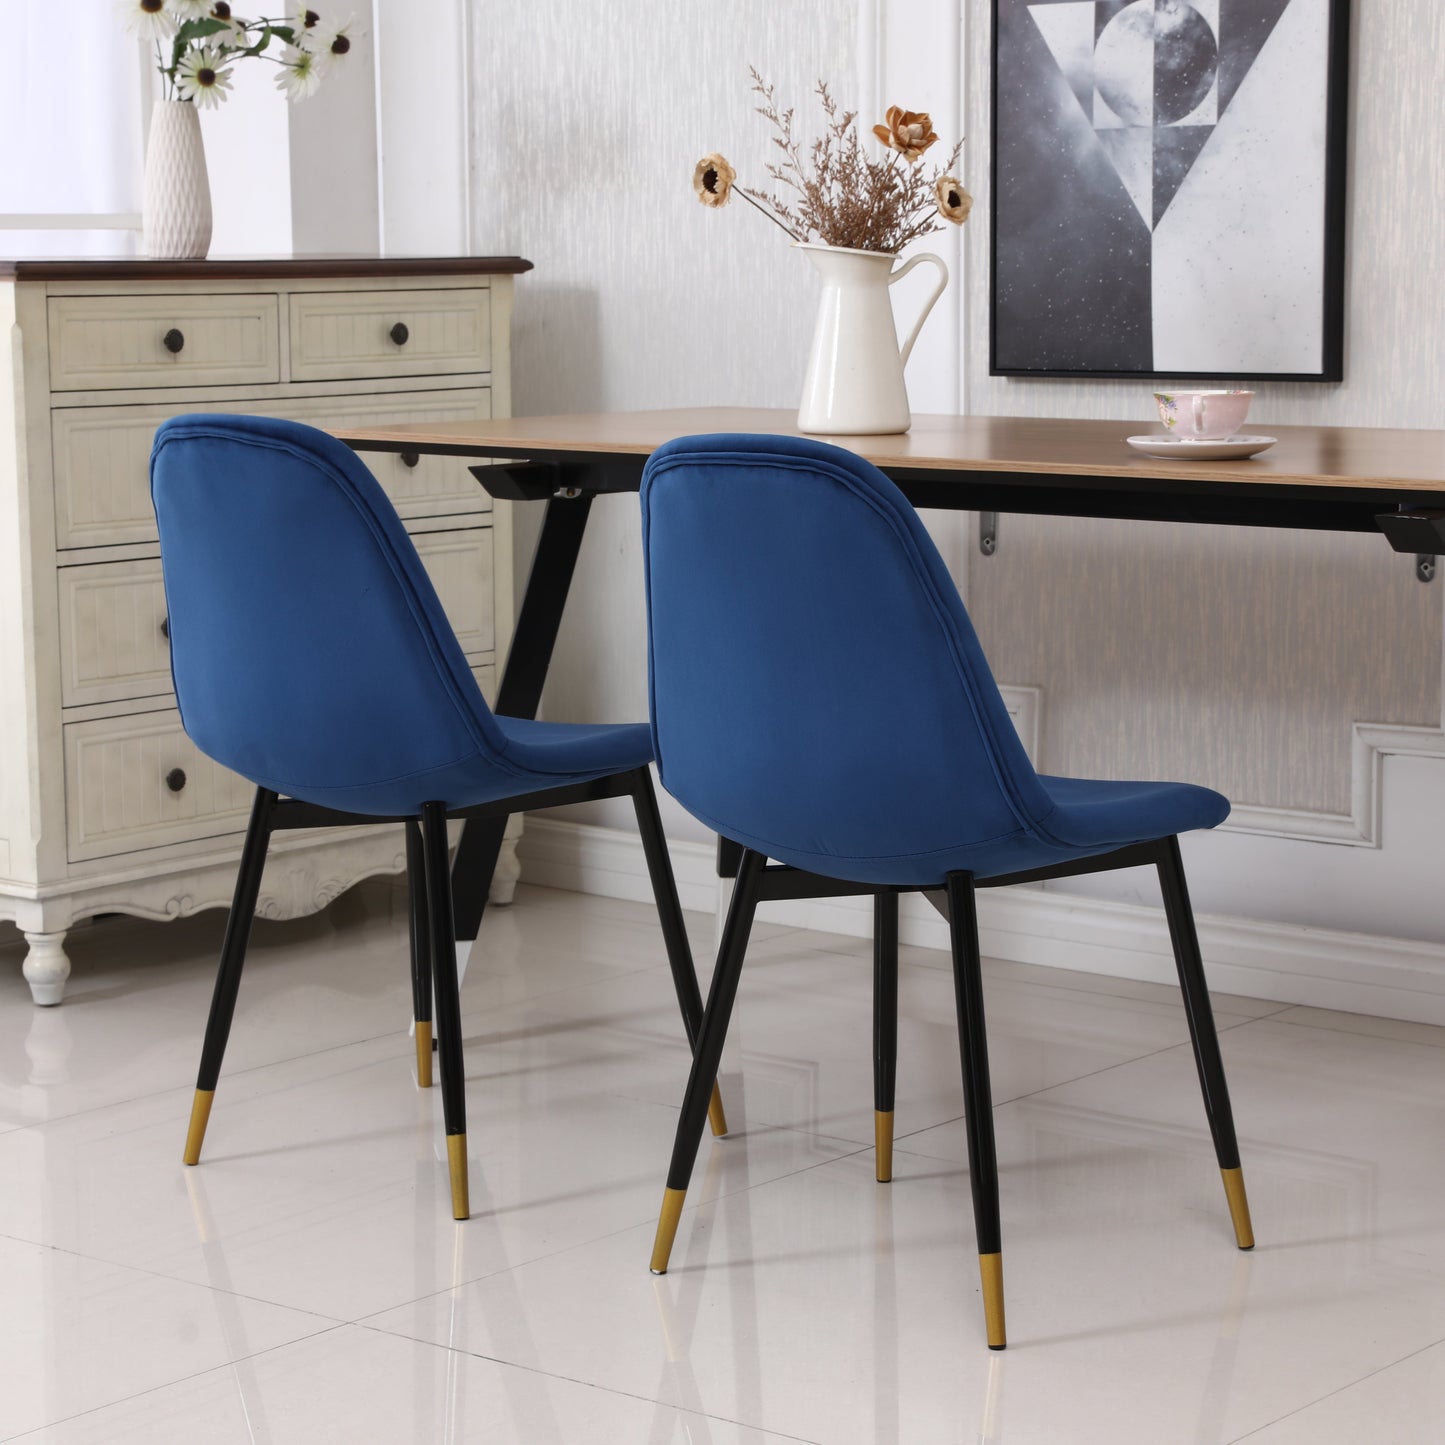 Lassan Contemporary Fabric Dining Chairs, Set of 4, Blue